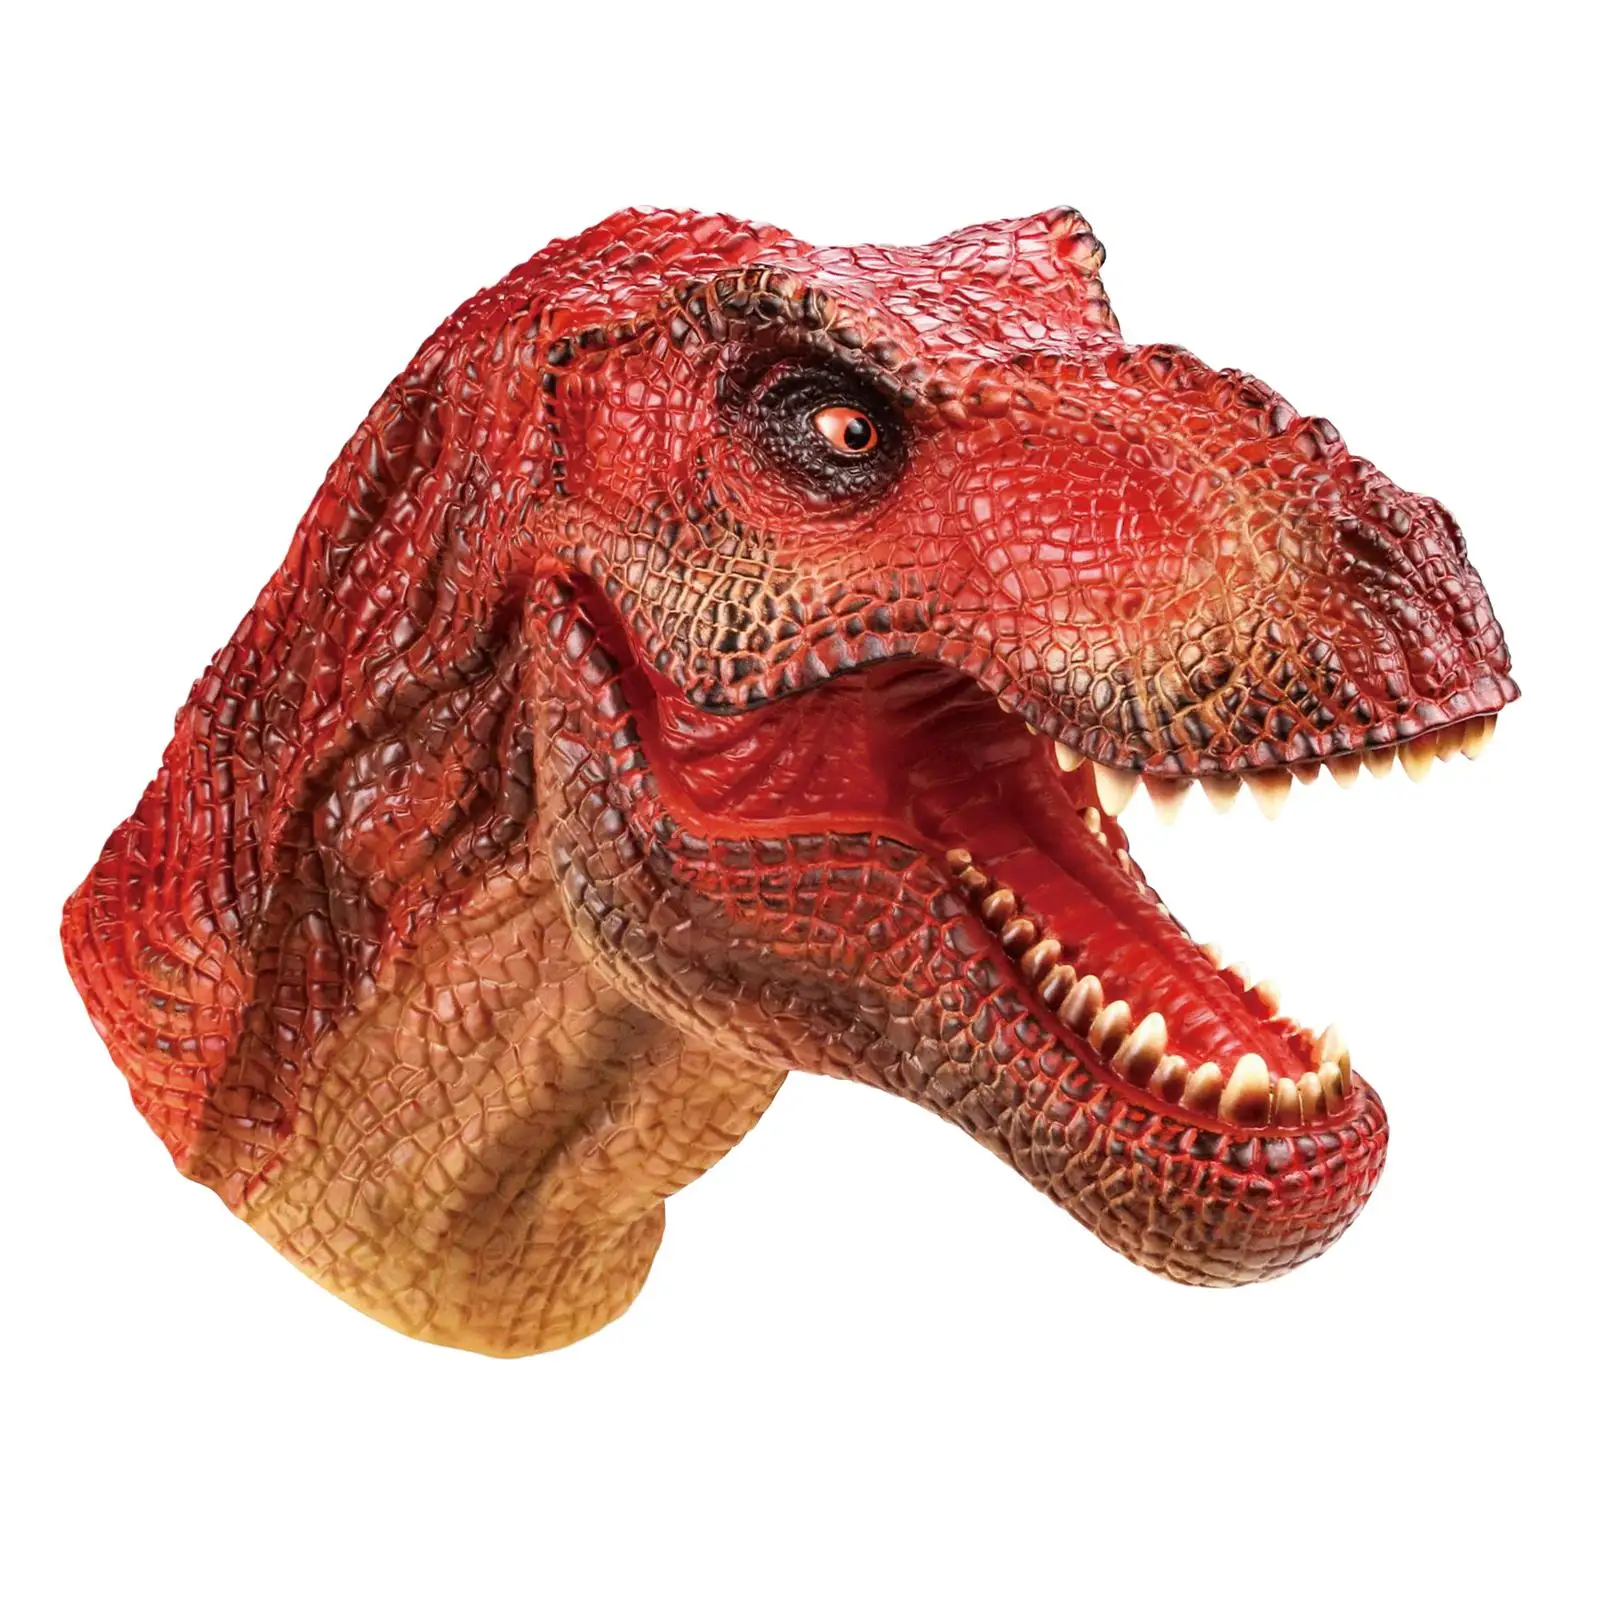 Dinosaur Model Hand Puppet Interactive Toys Halloween Decorations Gloves for Parties Role Play Games Preschool Girls Toddlers